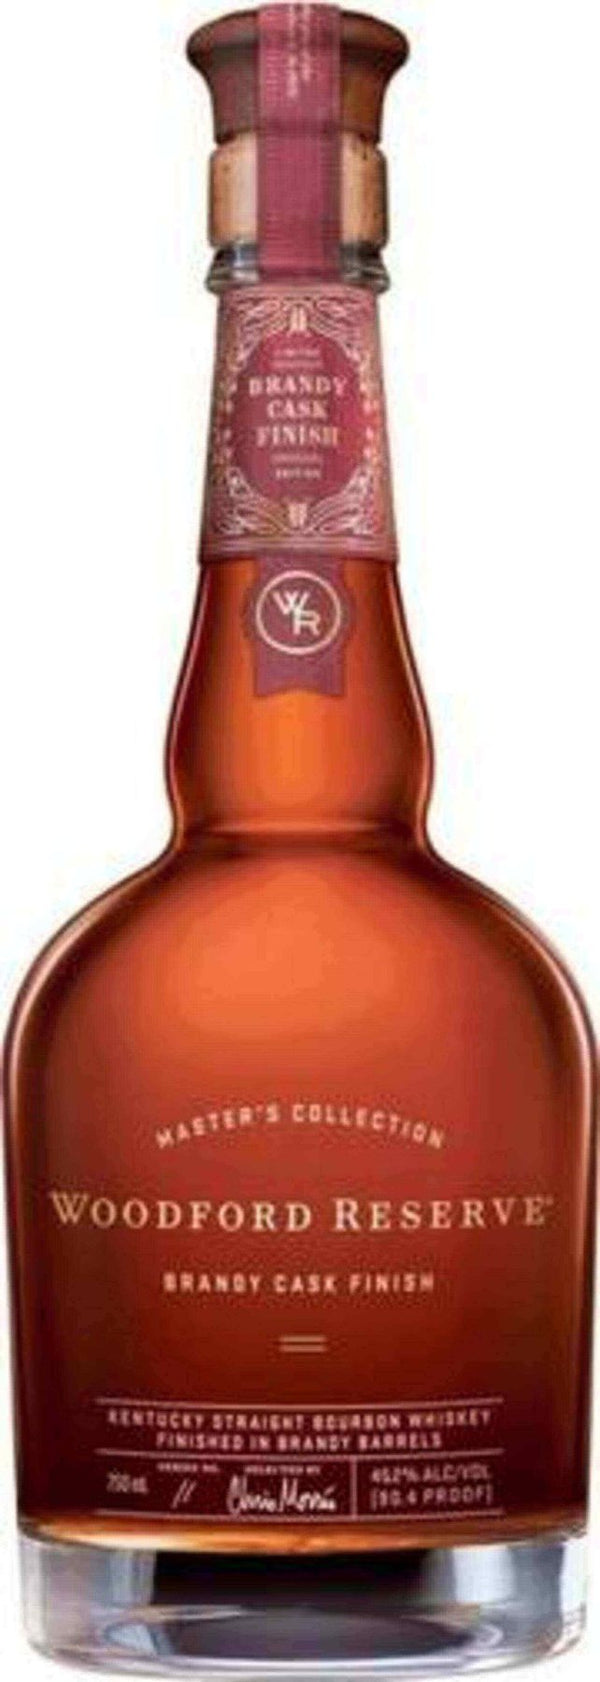 Woodford Reserve Master's Collection Brandy Cask Finish Bourbon - Flask Fine Wine & Whisky